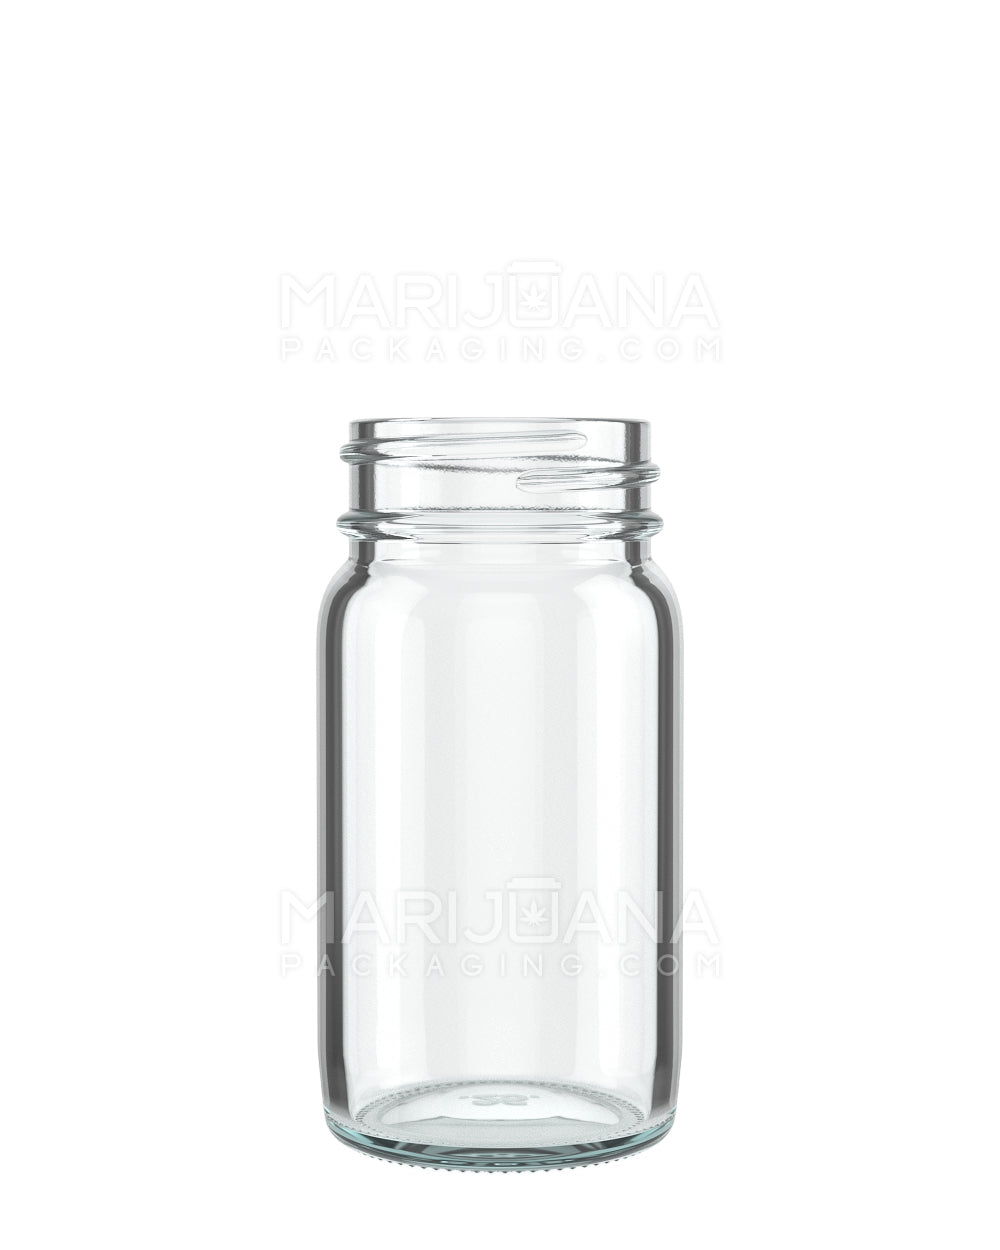 32 Oz Plastic Jars with lids, wide mouth, Bulk Pack of 6, Clear Round Jar  & White Lid,-Made in USA